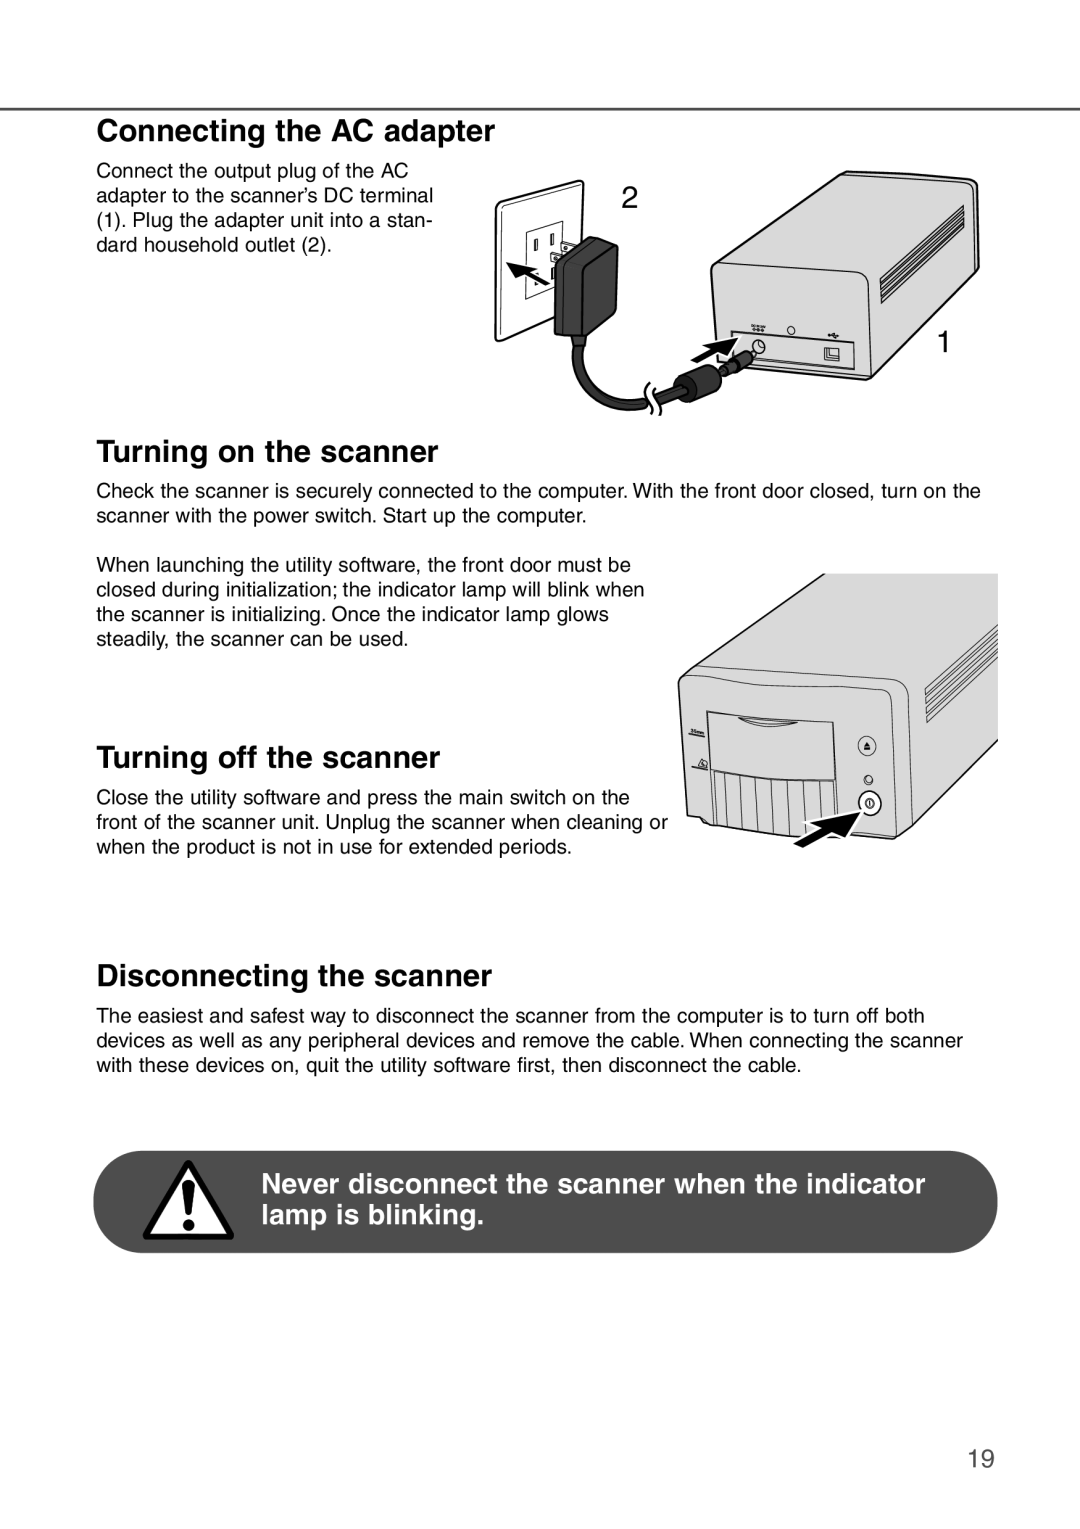 Konica Minolta AF-2840 instruction manual Connecting the AC adapter, Turning on the scanner, Turning off the scanner 